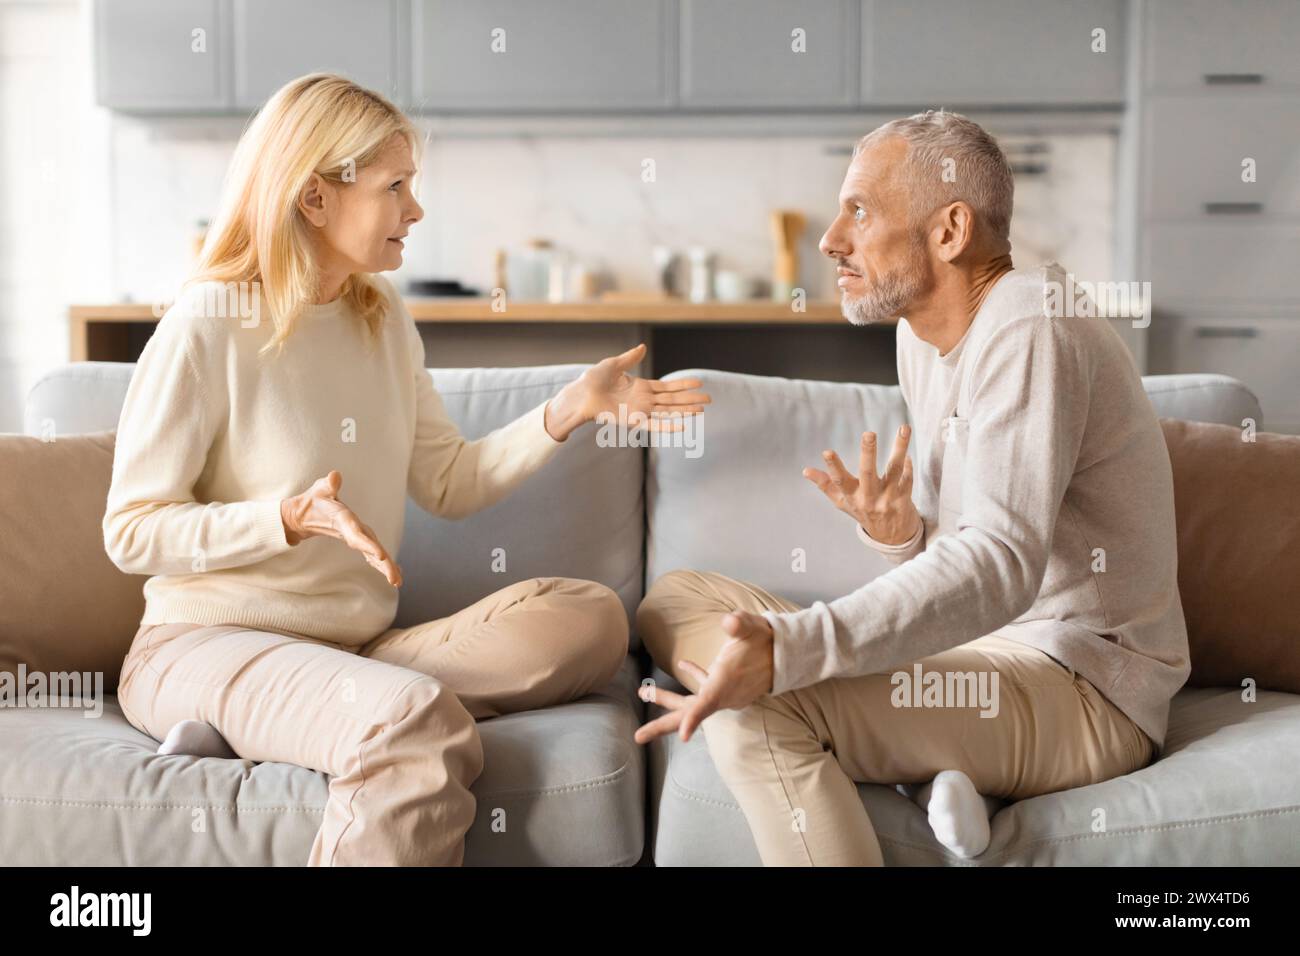 Mature couple engaged in a conversation on the couch Stock Photo